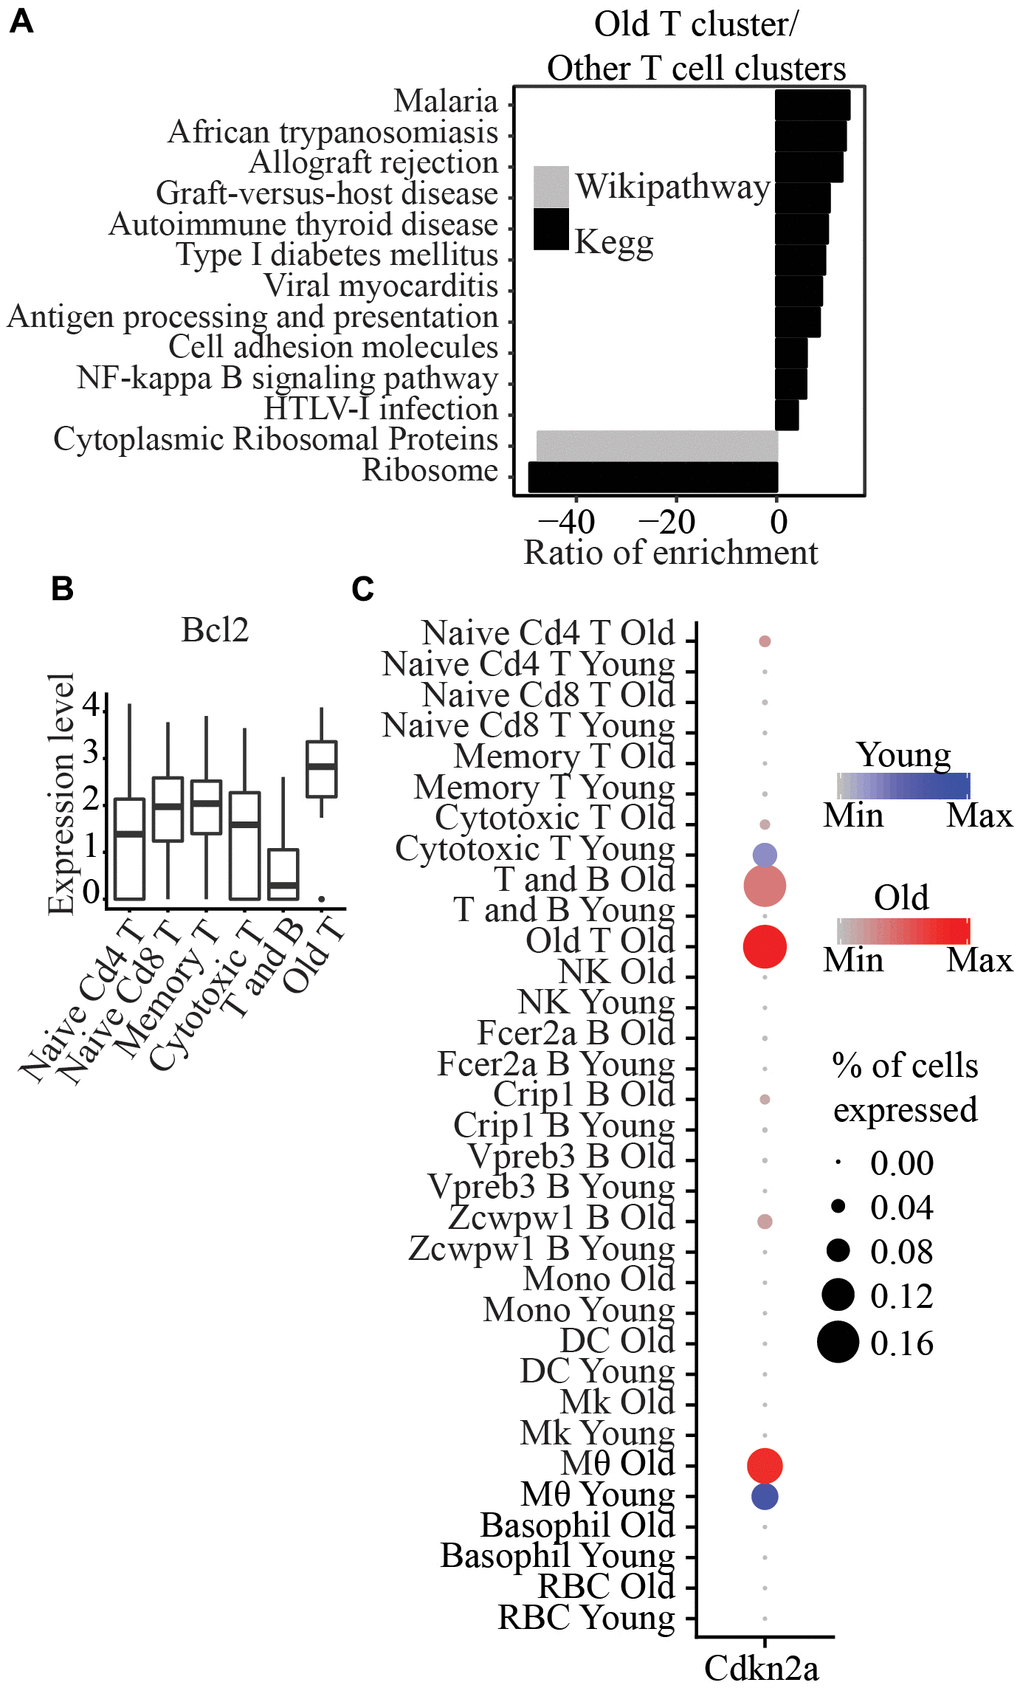 (A) Wikipathway and Kegg pathway analysis of differentially expressed genes between Old T cluster and other T cell clusters. (B) Bcl2 is significantly higher in Old T cluster compared to other T cell clusters. (C) Cdkn2a is significantly higher in Old T cluster compared to all other clusters.